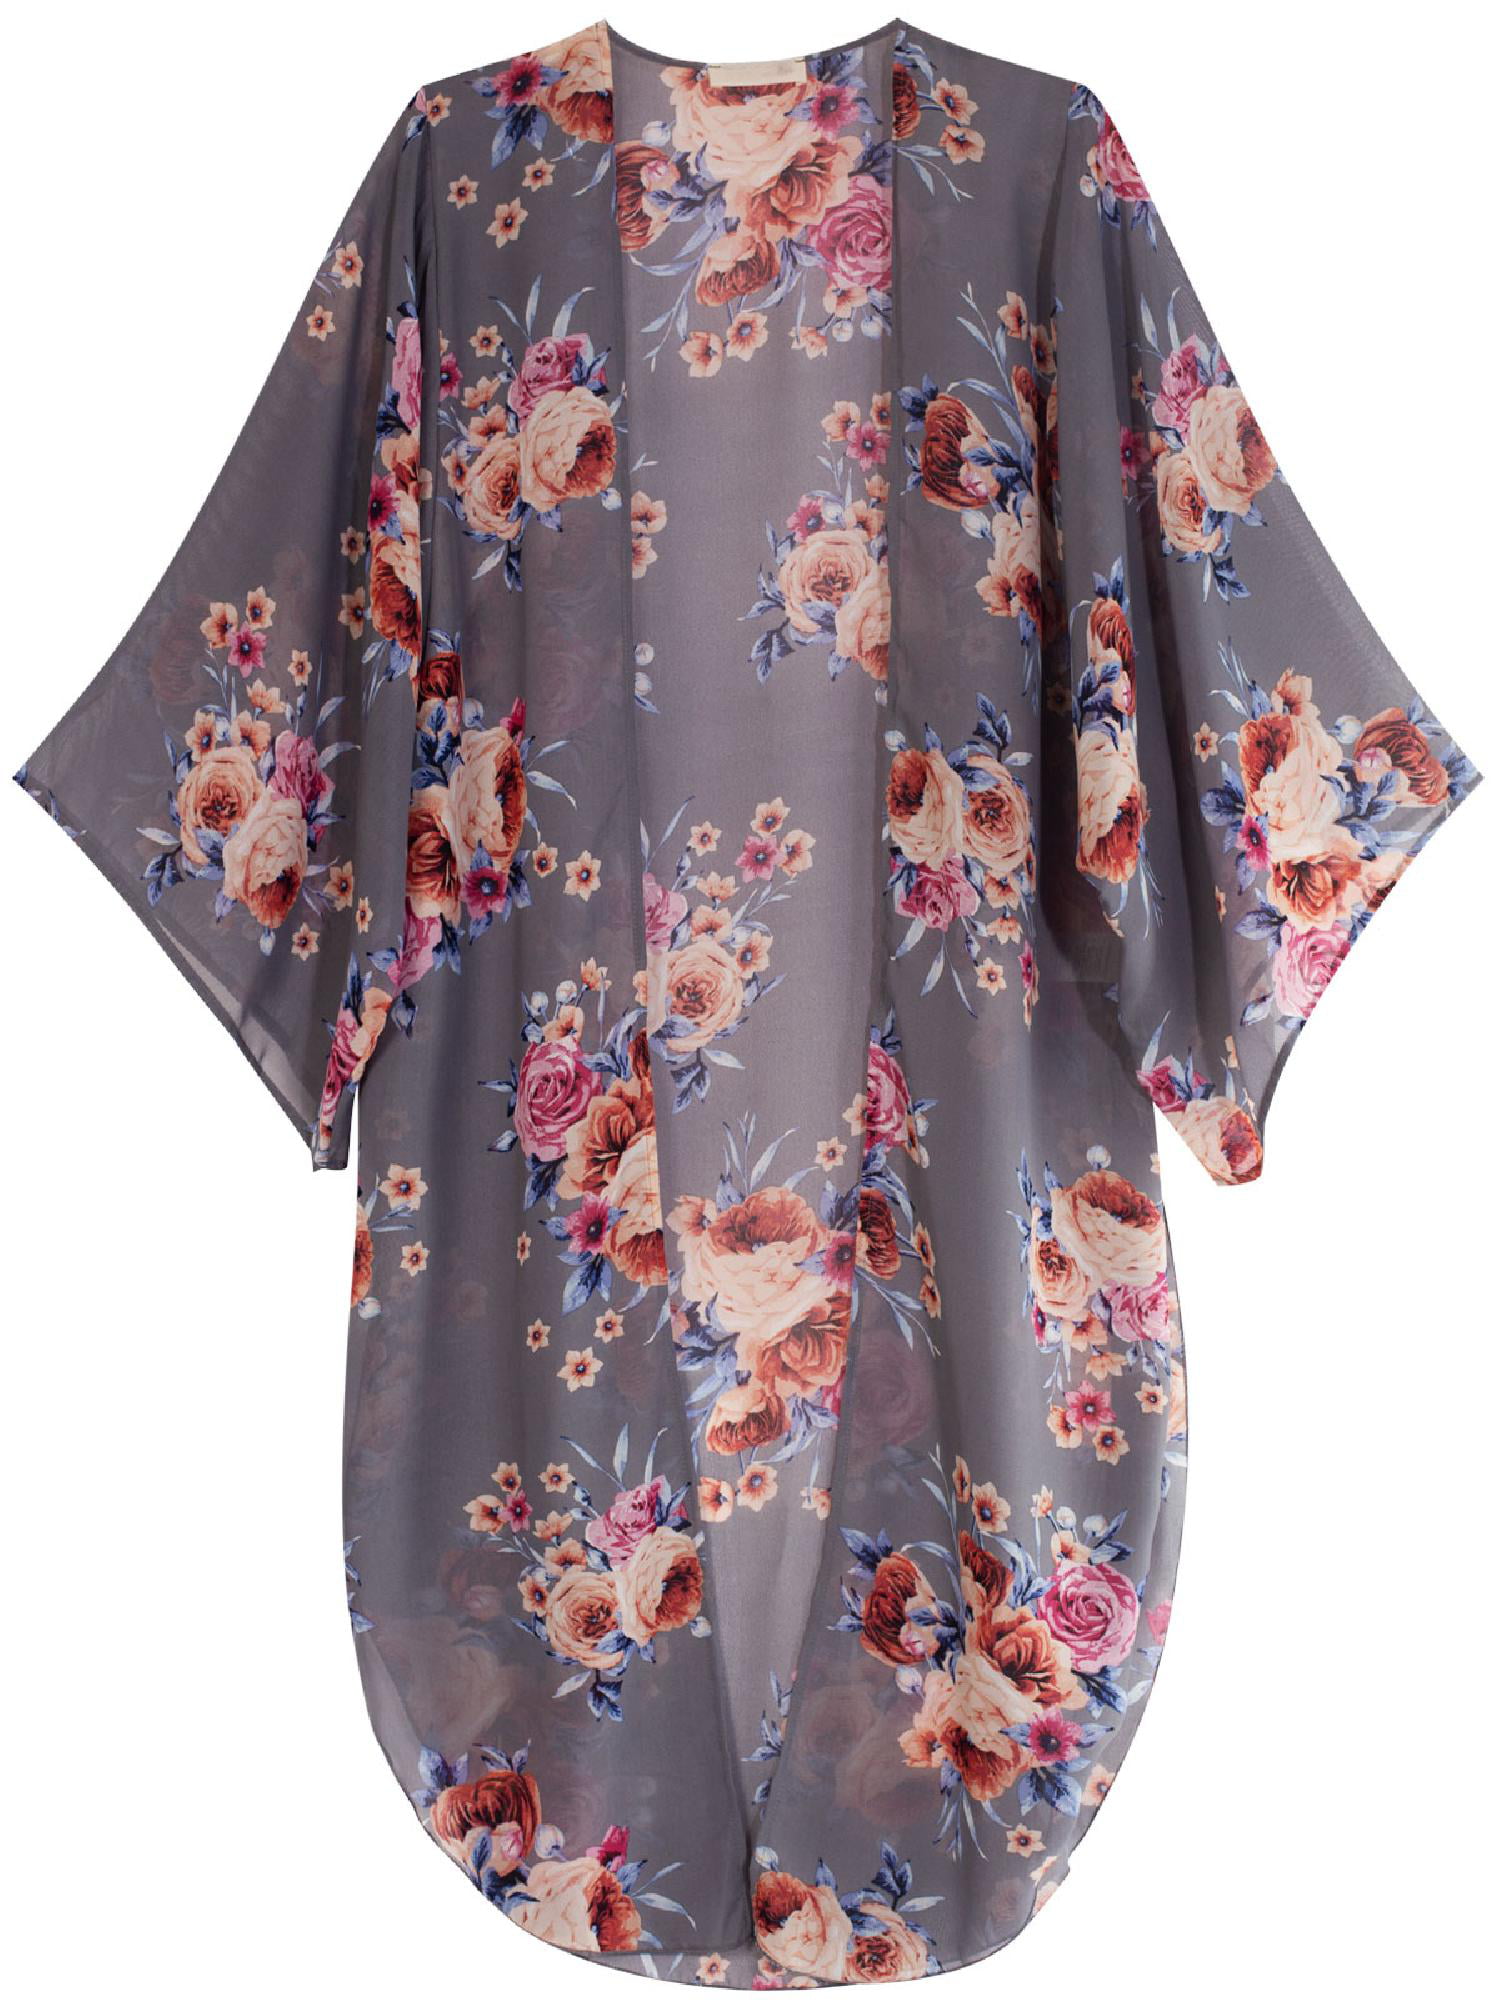 Made by Olivia - Made by Olivia Women's Open-Front Floral Print Kimono ...